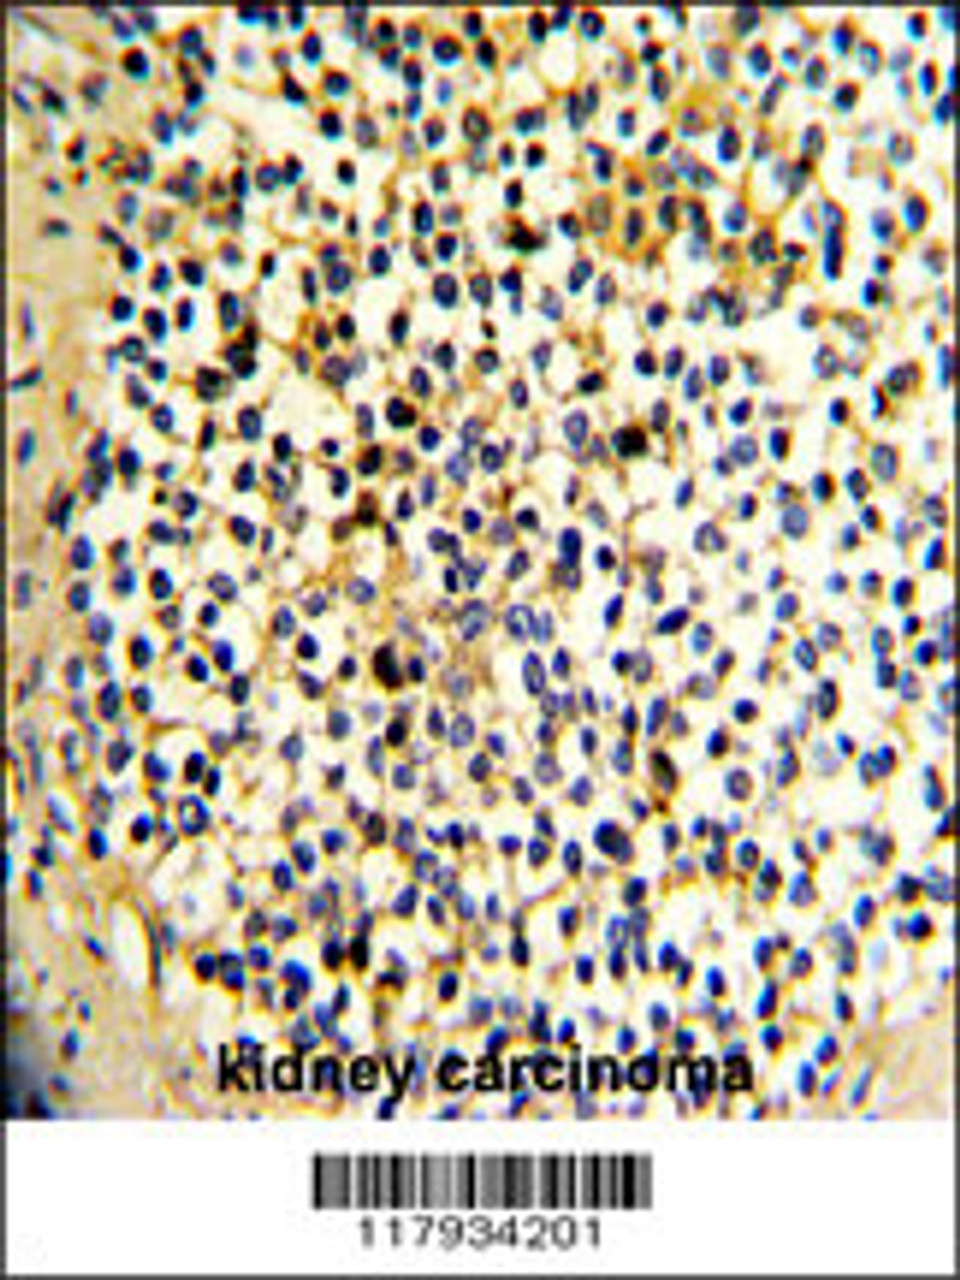 Formalin-fixed and paraffin-embedded human kidney carcinoma with DCXR Antibody, which was peroxidase-conjugated to the secondary antibody, followed by DAB staining.